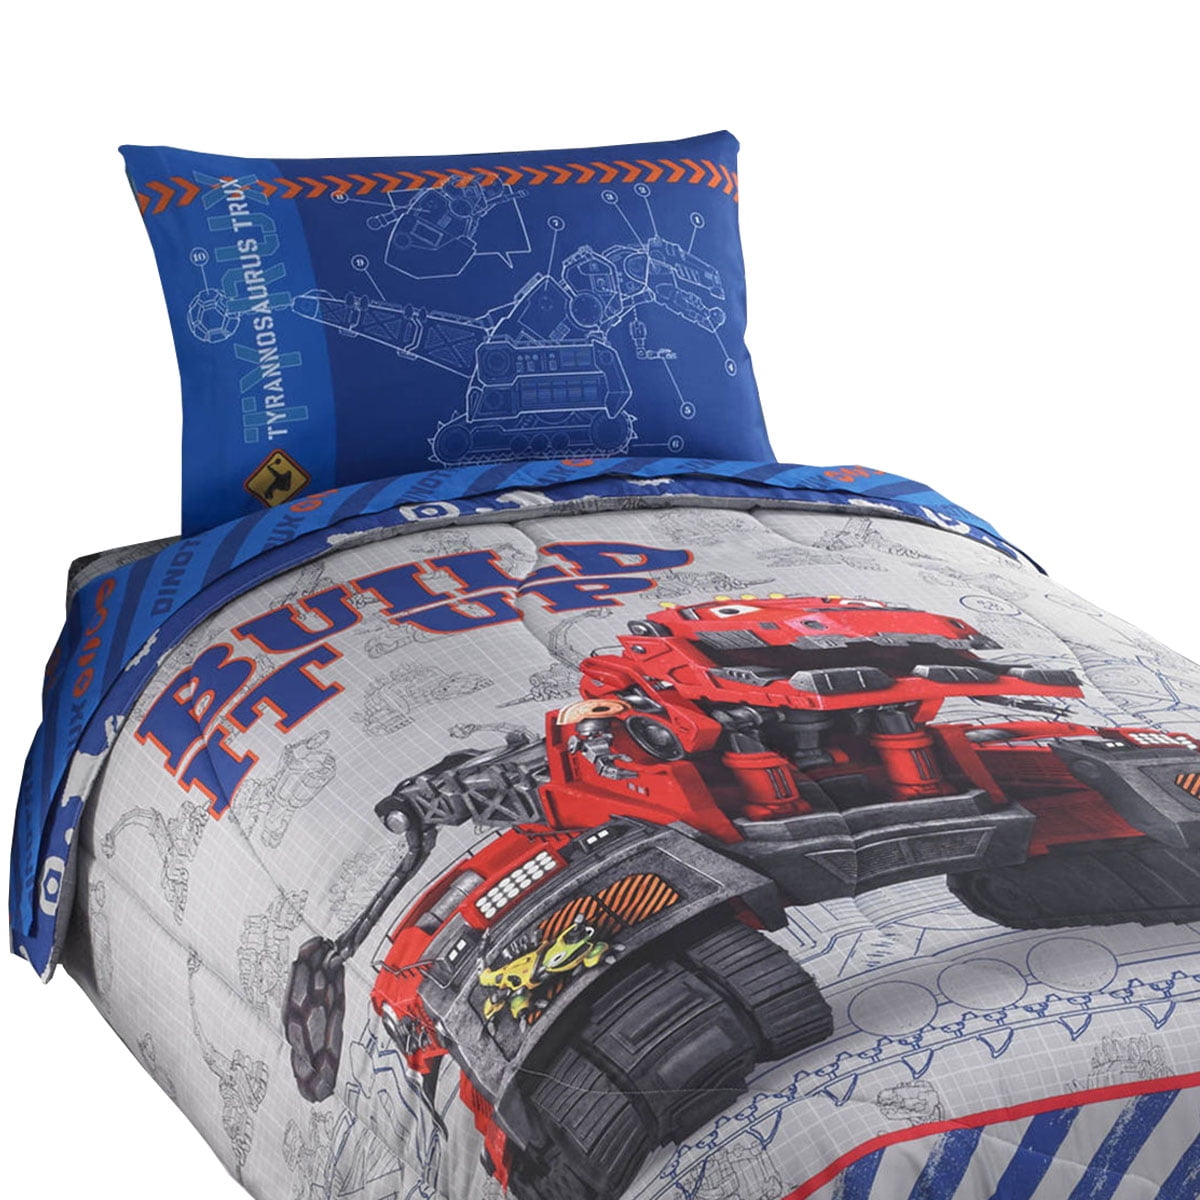 Dinotrux Build It Up Twin/Full Comforter